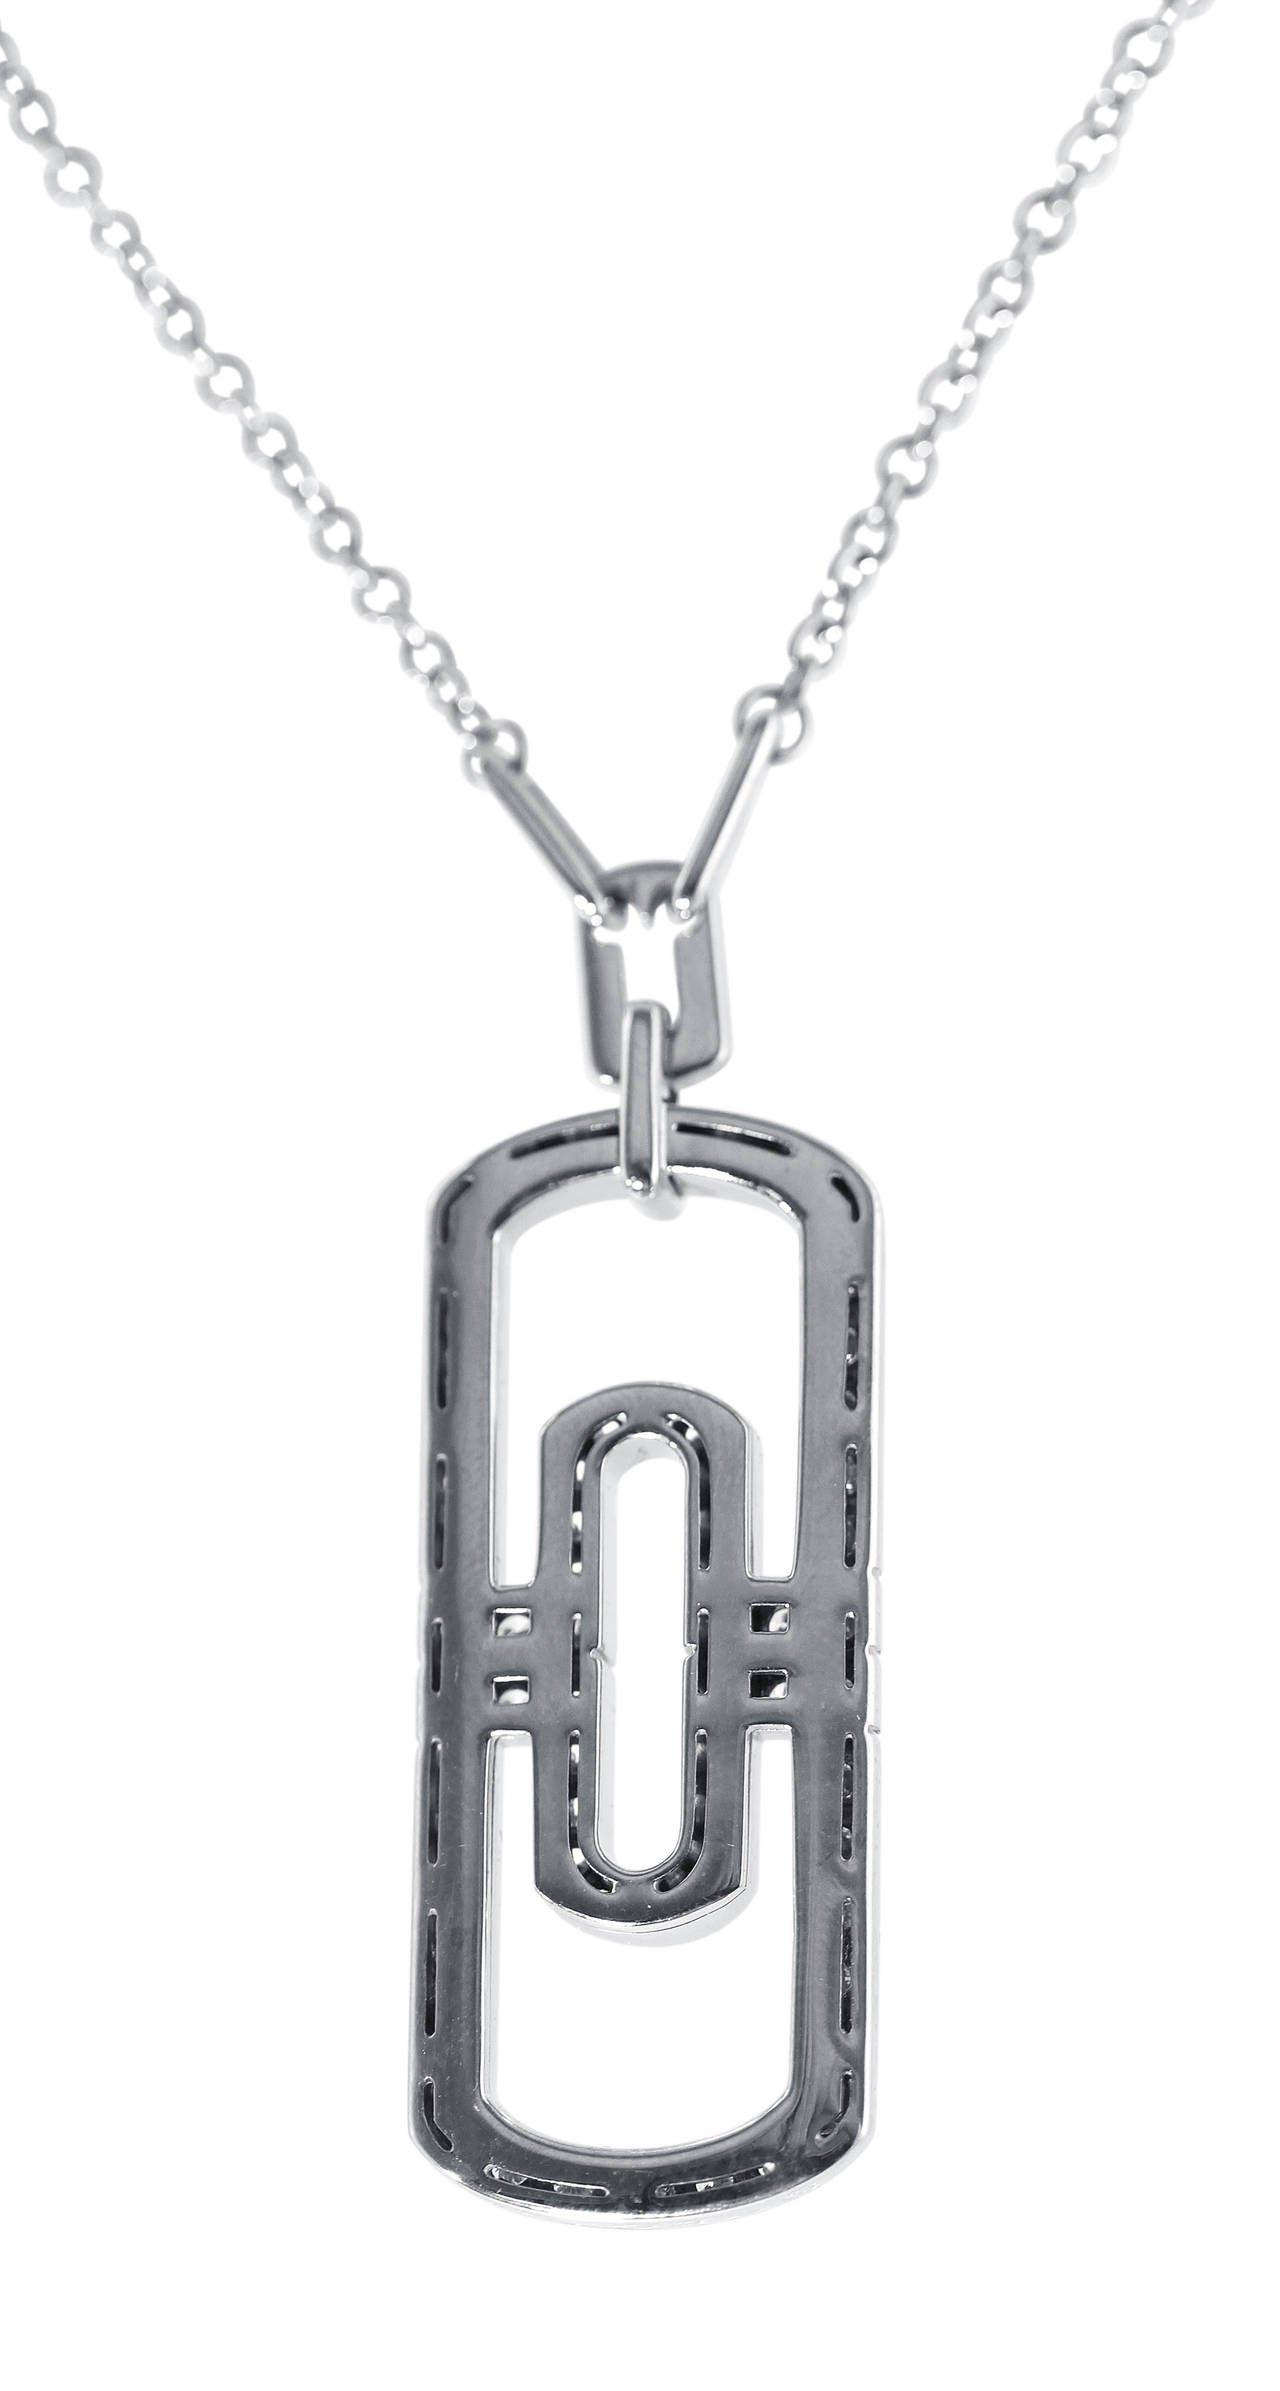 An 18 karat white gold and diamond 'Parentesi' pendant-necklace by Bulgari, Italy, the pendant of openwork rectangular geometric design set with 64 round diamonds weighing approximately 1.90 carats, completed with a white gold link chain, gross